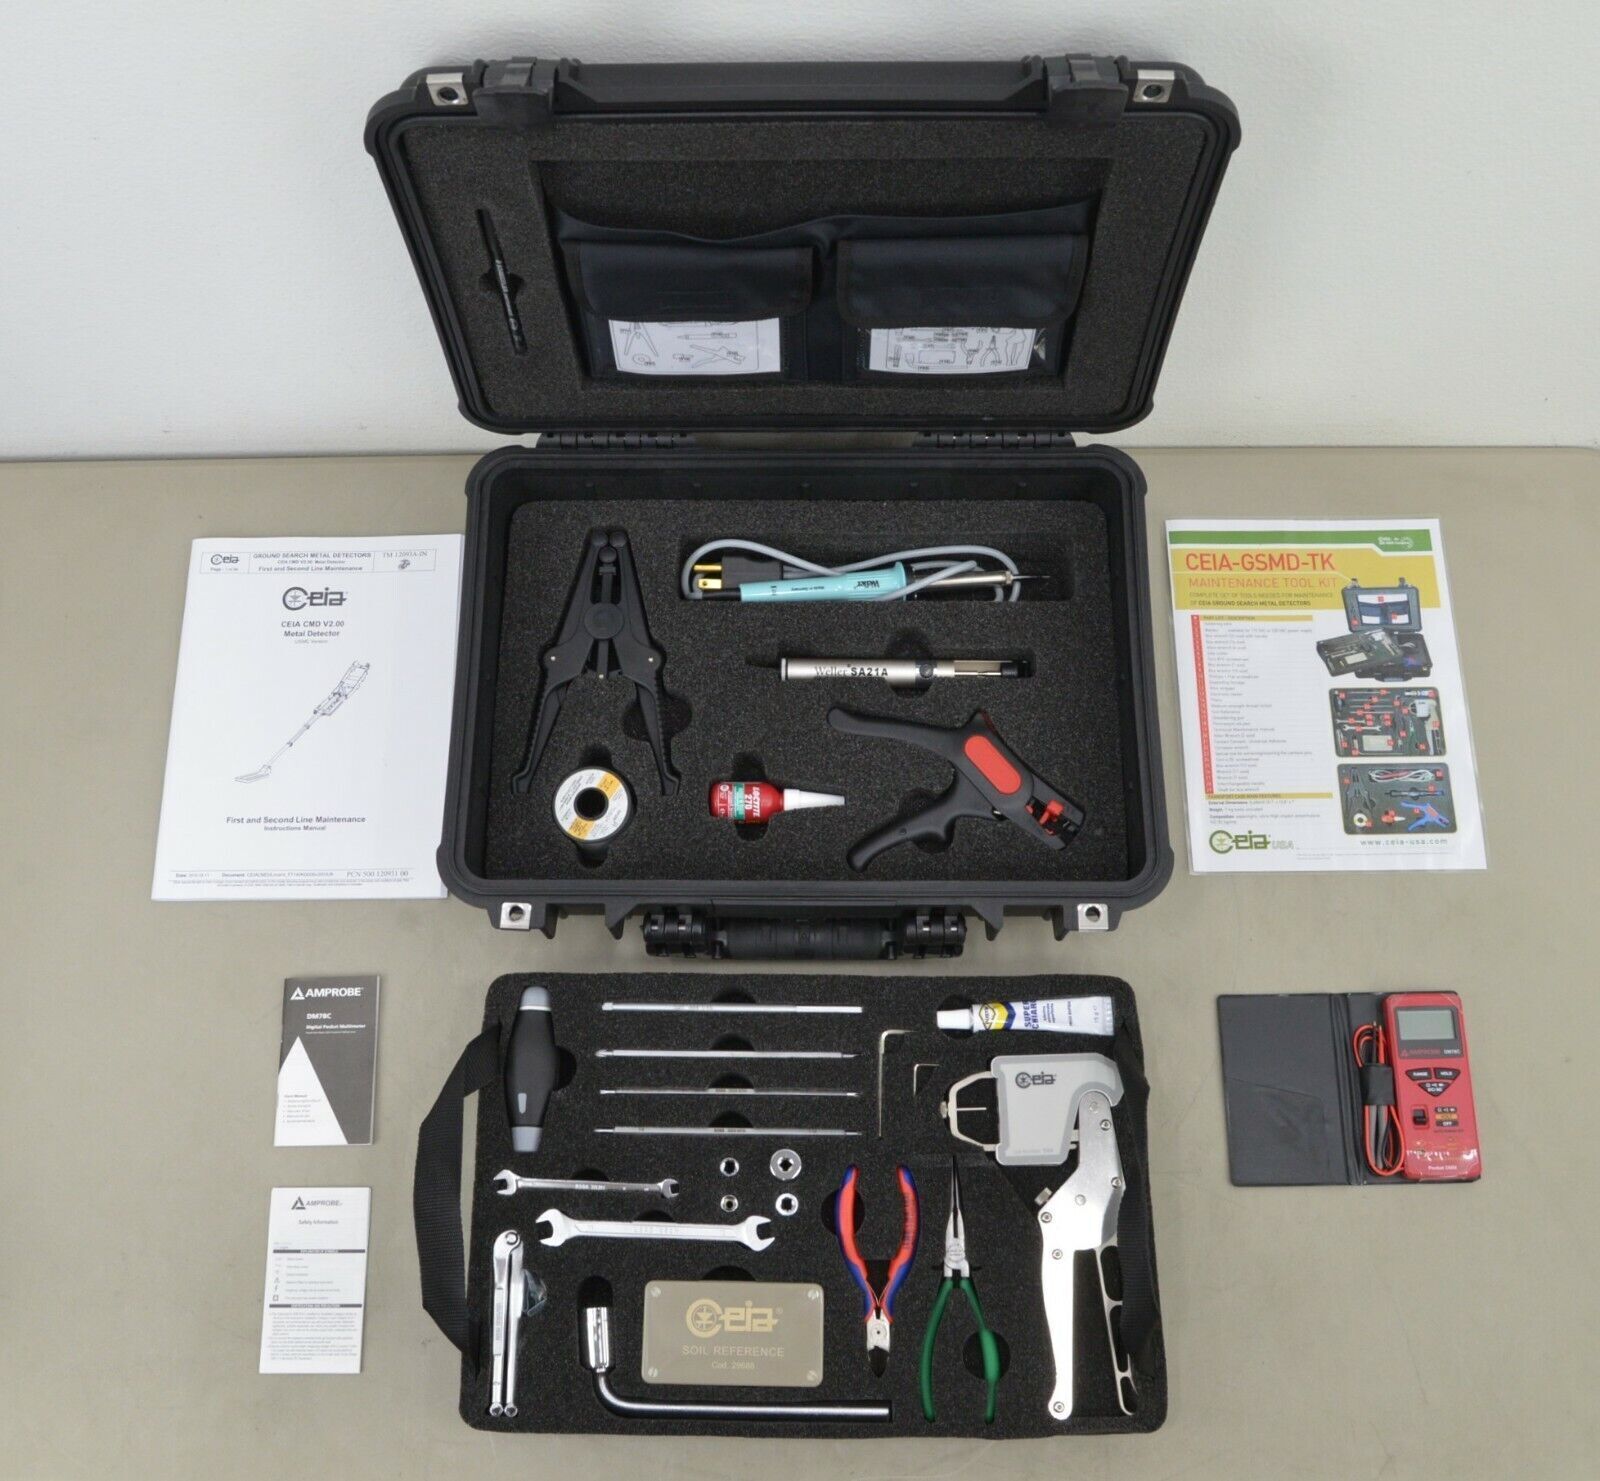 https://www.rhinotradellc.com/wp-content/uploads/imported/9/New-Ceia-Ground-Search-Metal-Detector-Maintenance-Tool-Kit-GSMD-TK-115-185563729589.jpg